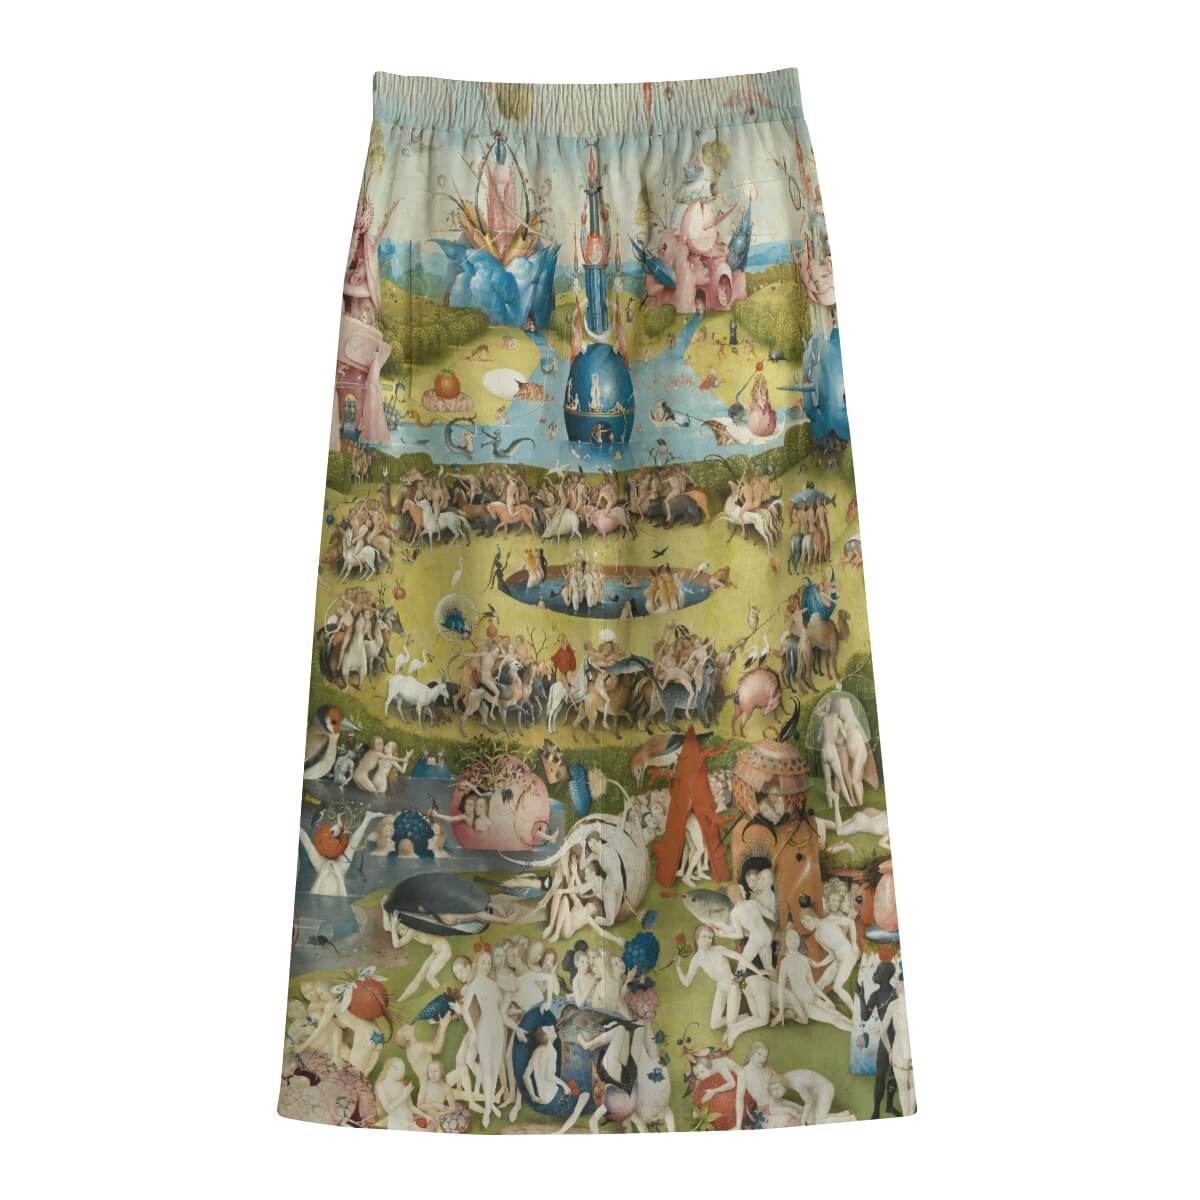 Hieronymus Bosch Skirt - Front Mid-slit View